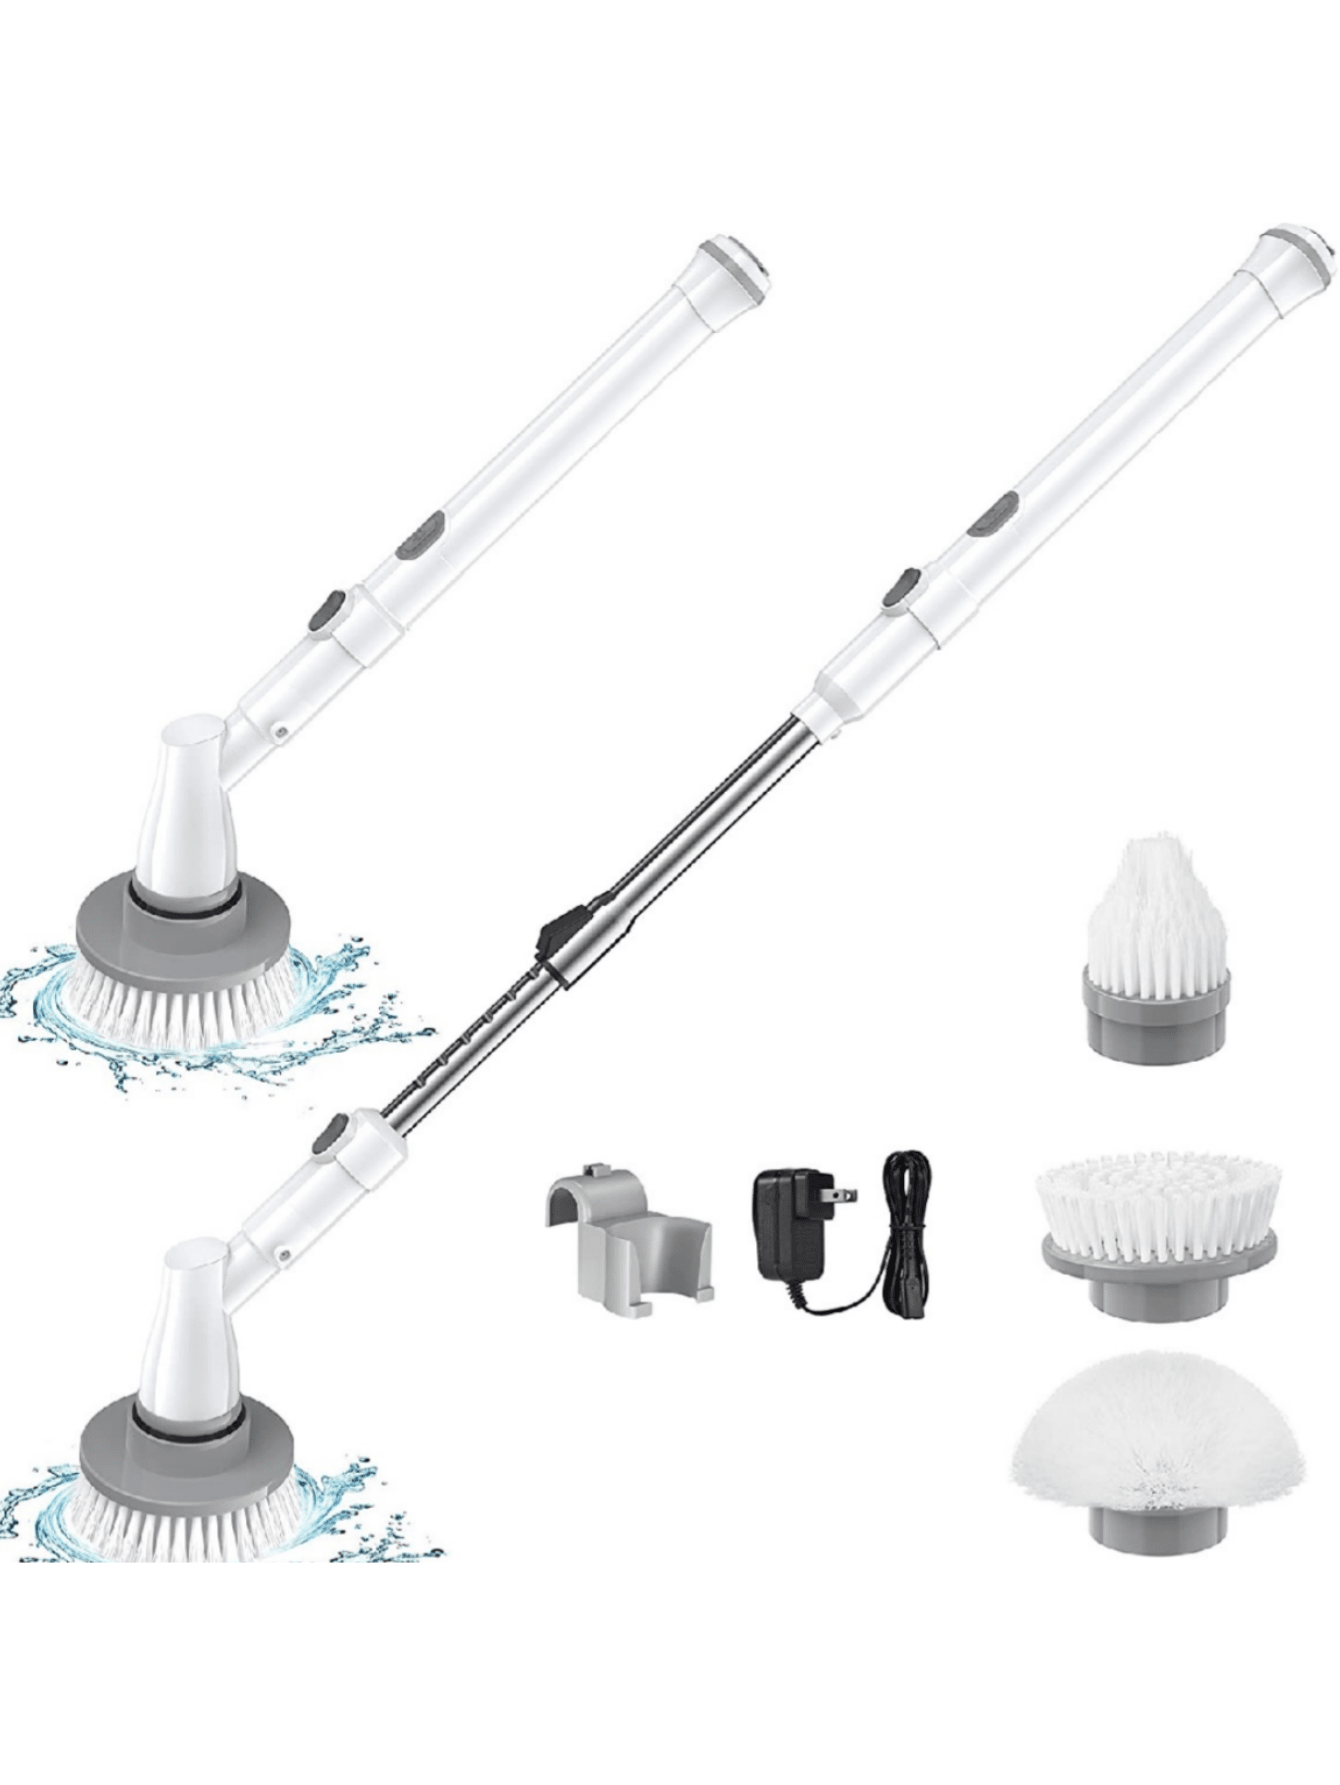 1 Set Plug-in Charge Wireless White Electric Spinning Floor Scrubber, With Extendable Handle Shower Scrubber, With 3 Replaceable Brush Head Bathtub Tile Floor Scrubber, 60 Minutes Running Time, 350 Rpm, With High Torque Motor, Suitable For Bathroom,-White-1